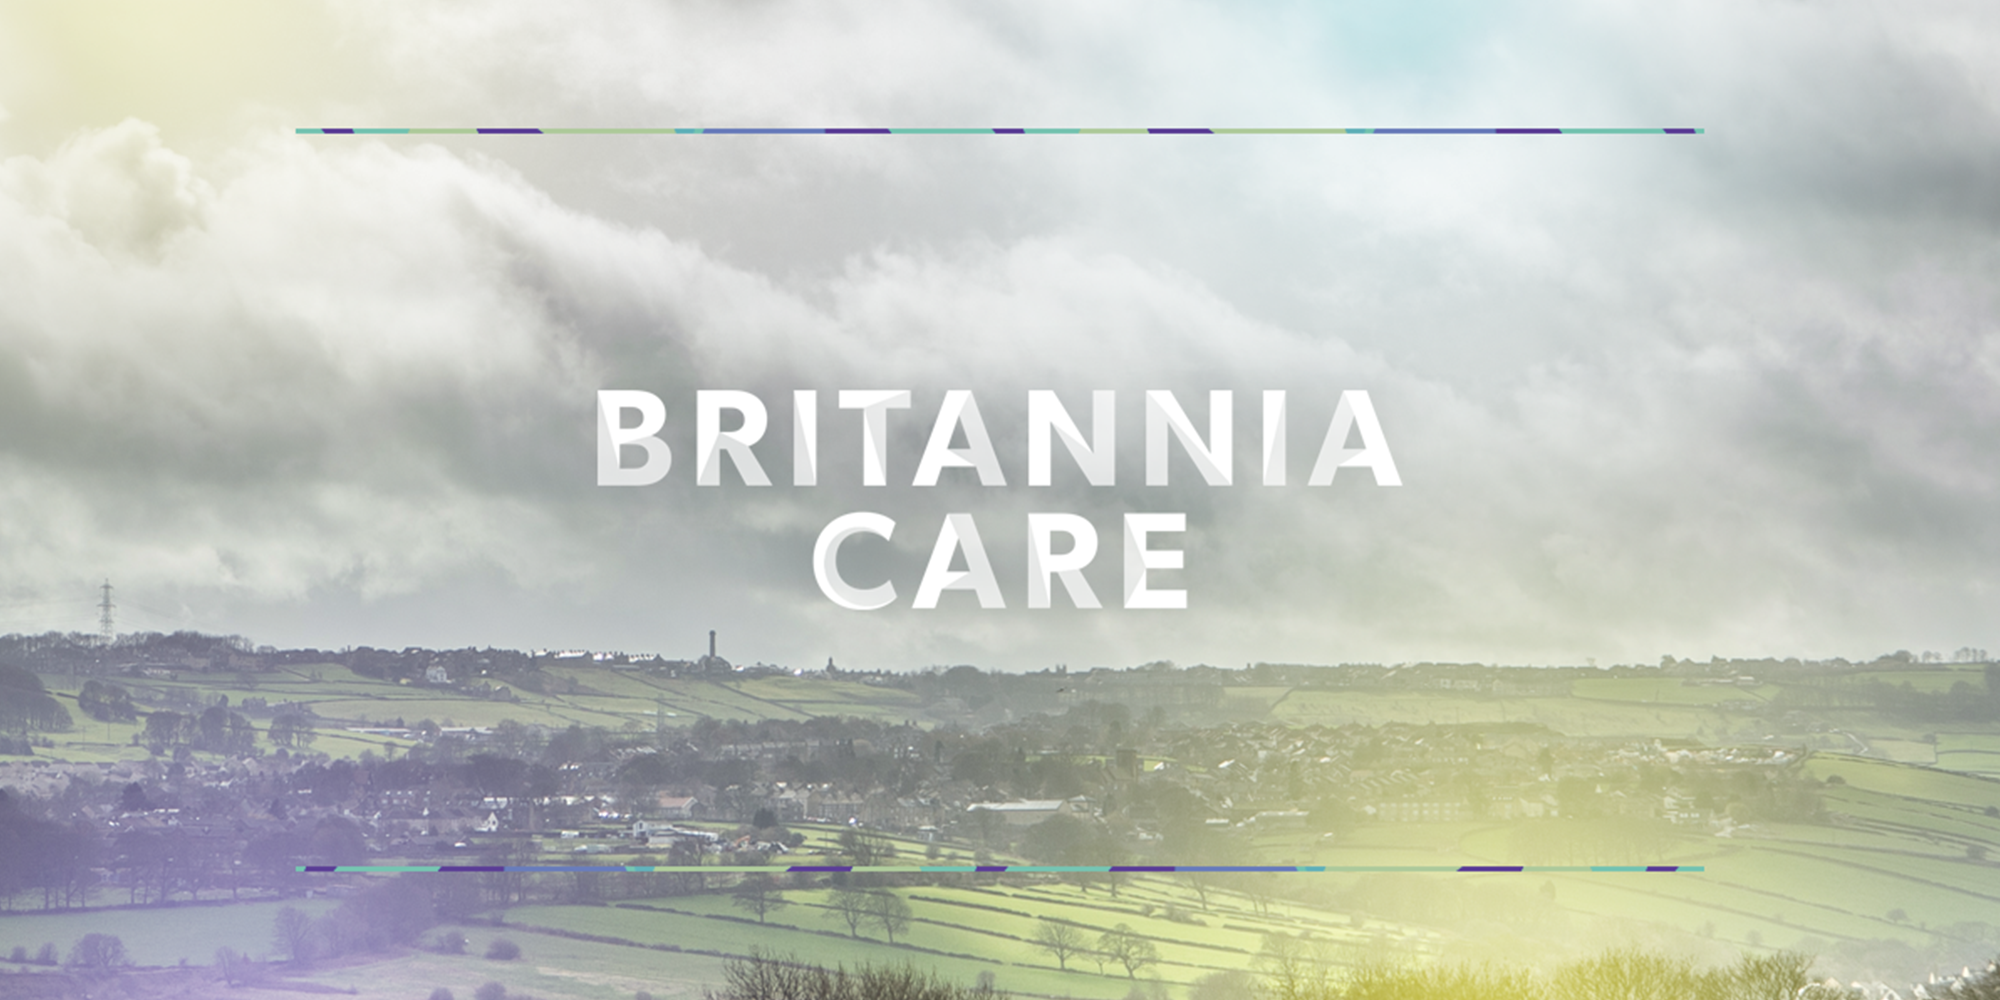 Britannia Care logo over a landscape of hills and trees